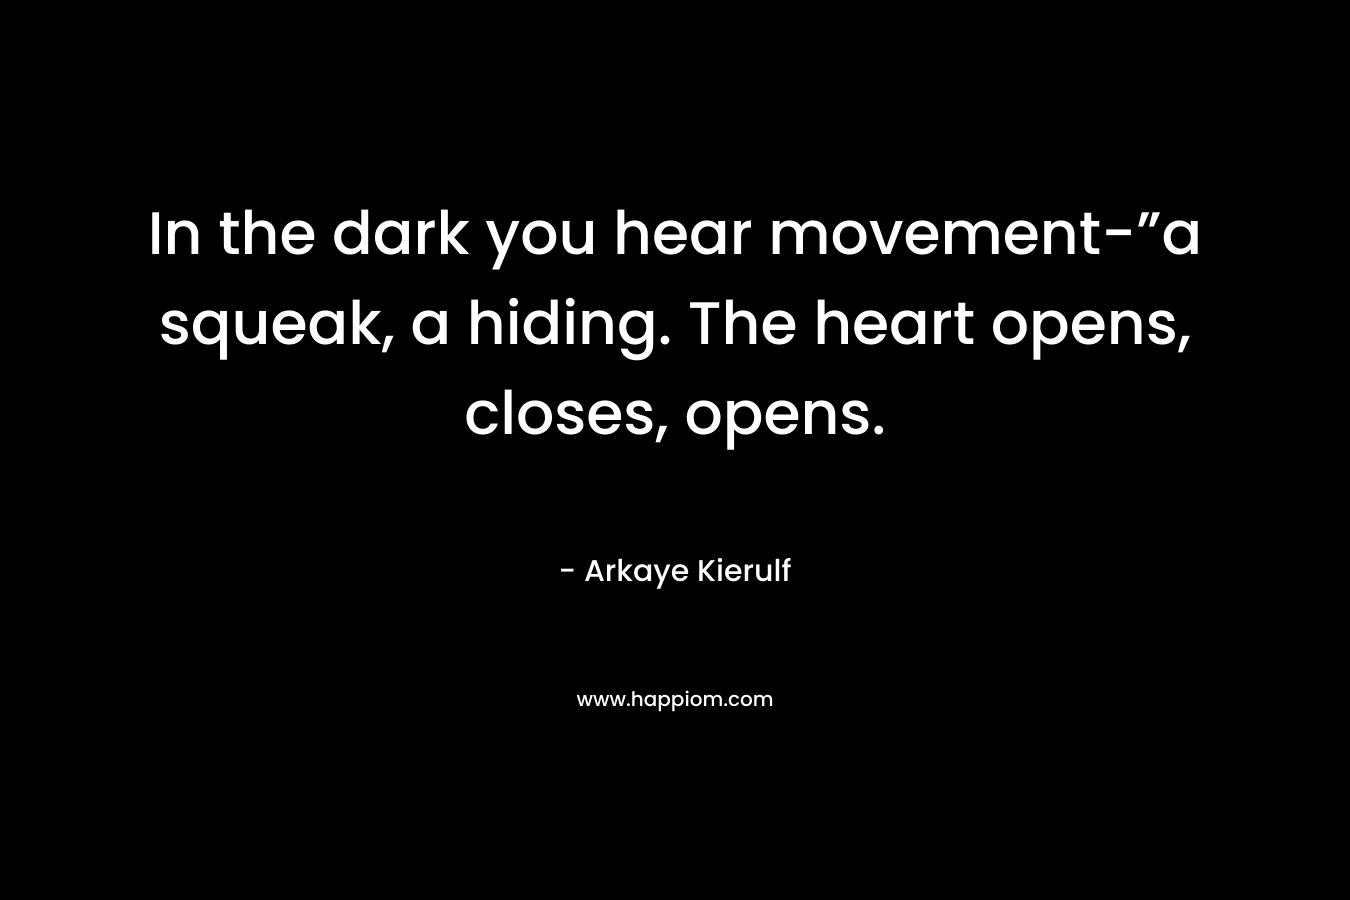 In the dark you hear movement-”a squeak, a hiding. The heart opens, closes, opens. – Arkaye Kierulf